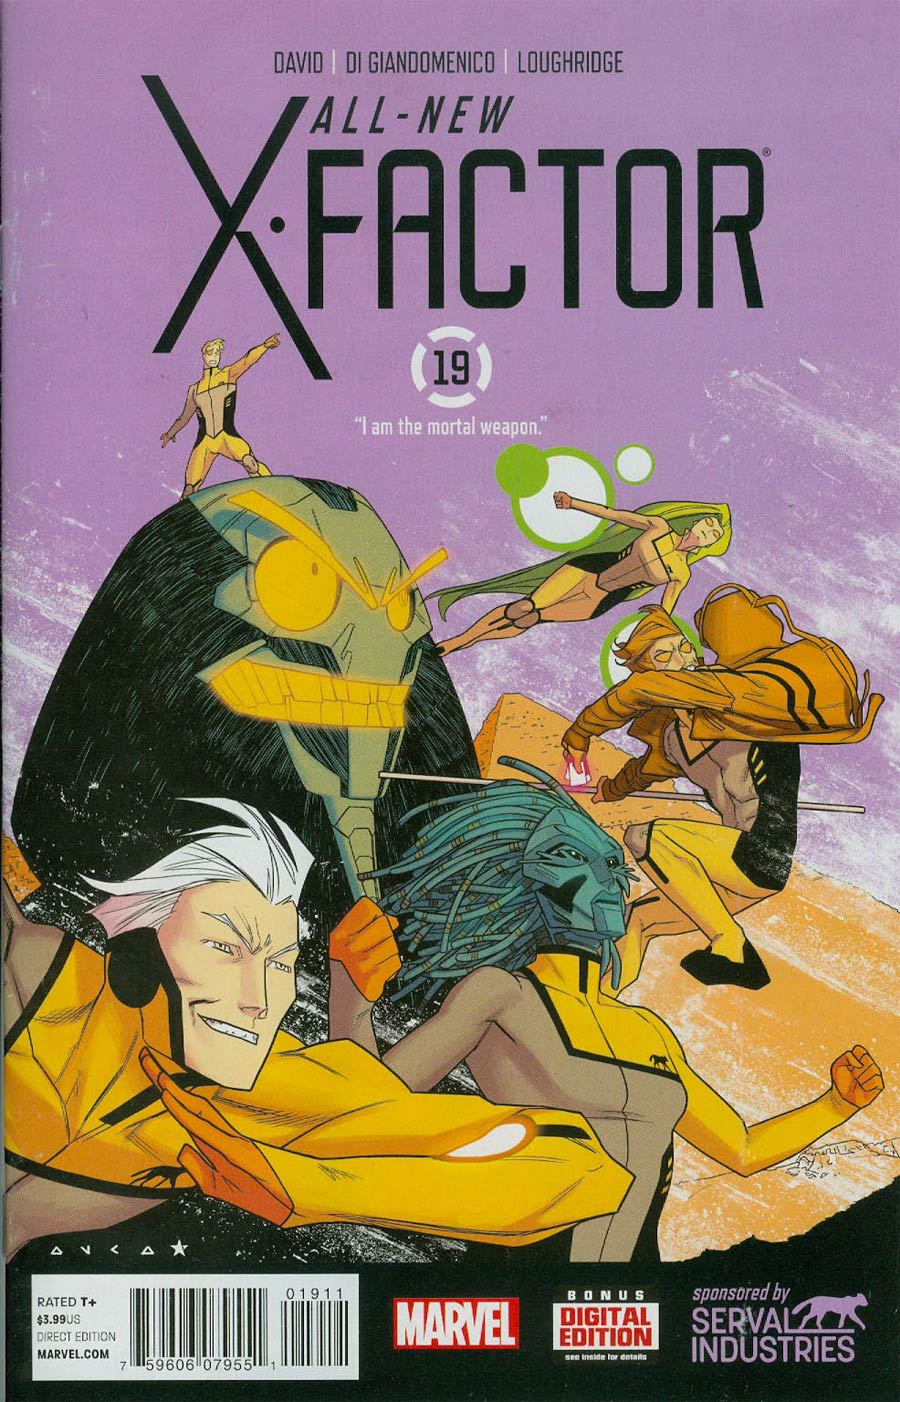 All-New X-Factor #19